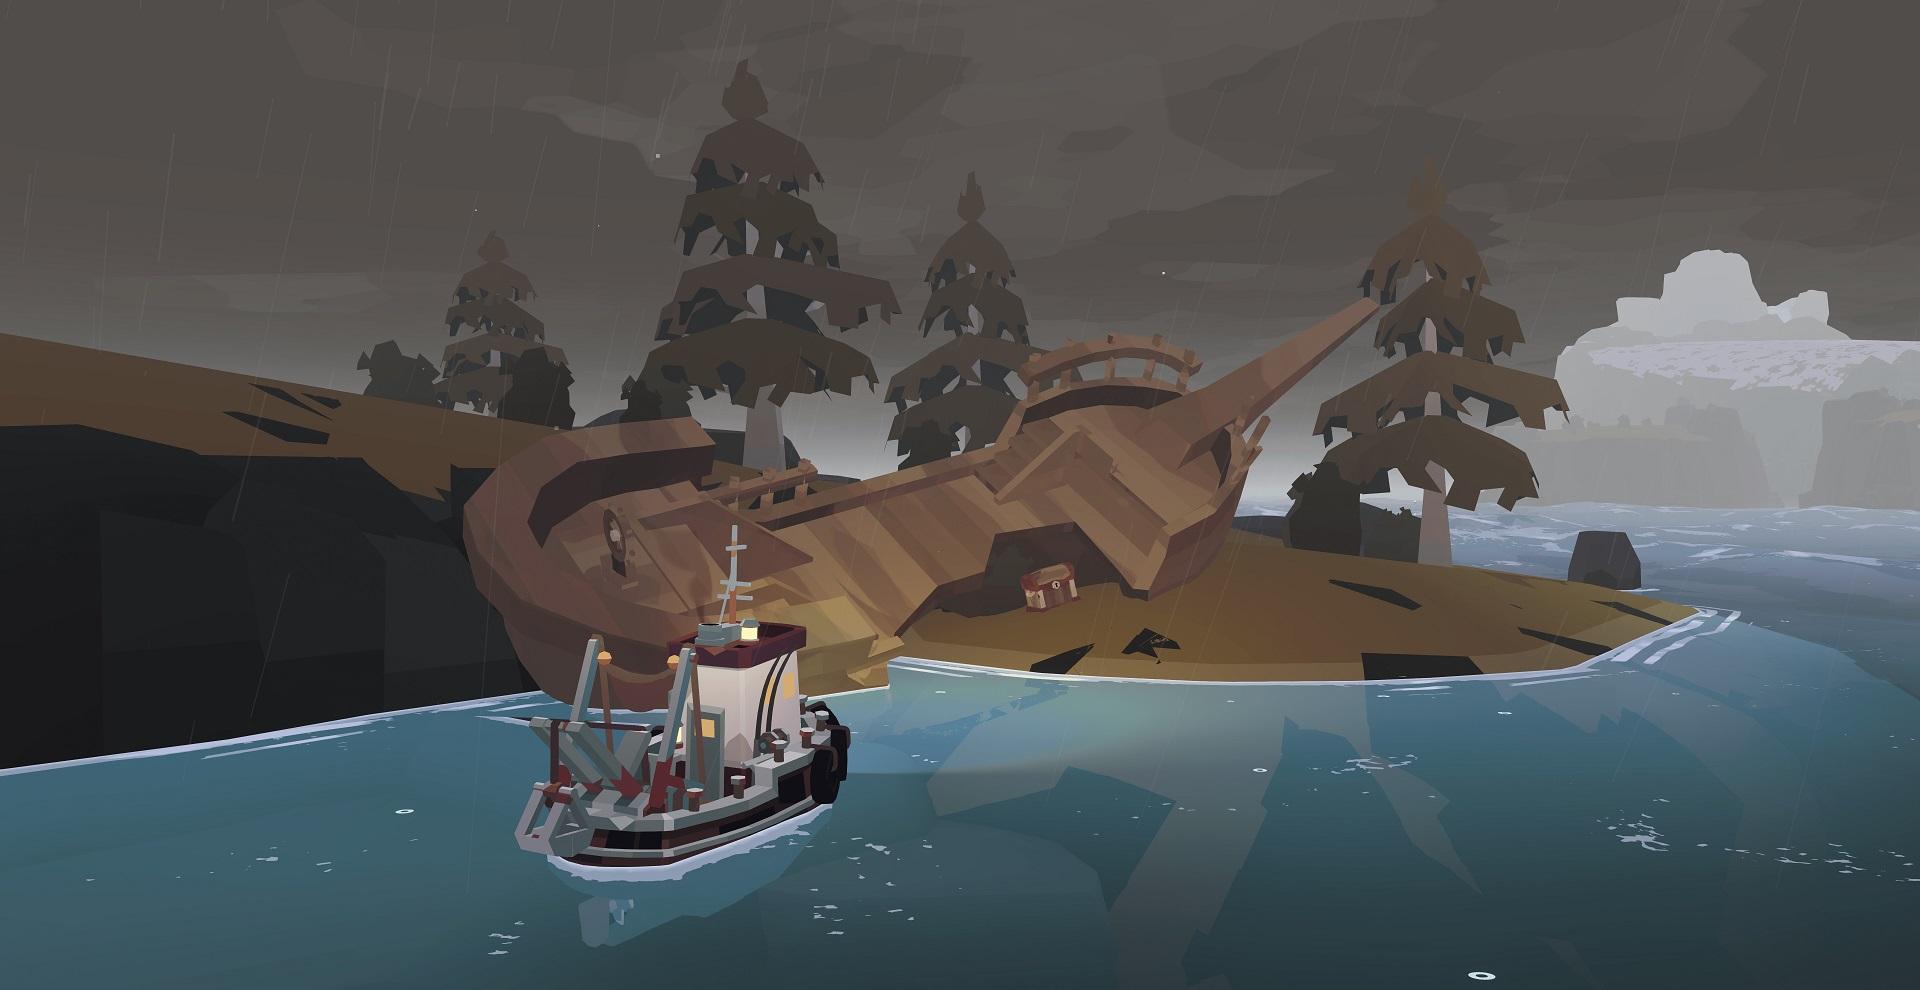 'Dredge' Boat approaching a shipwreck on an island with a treasure chest.